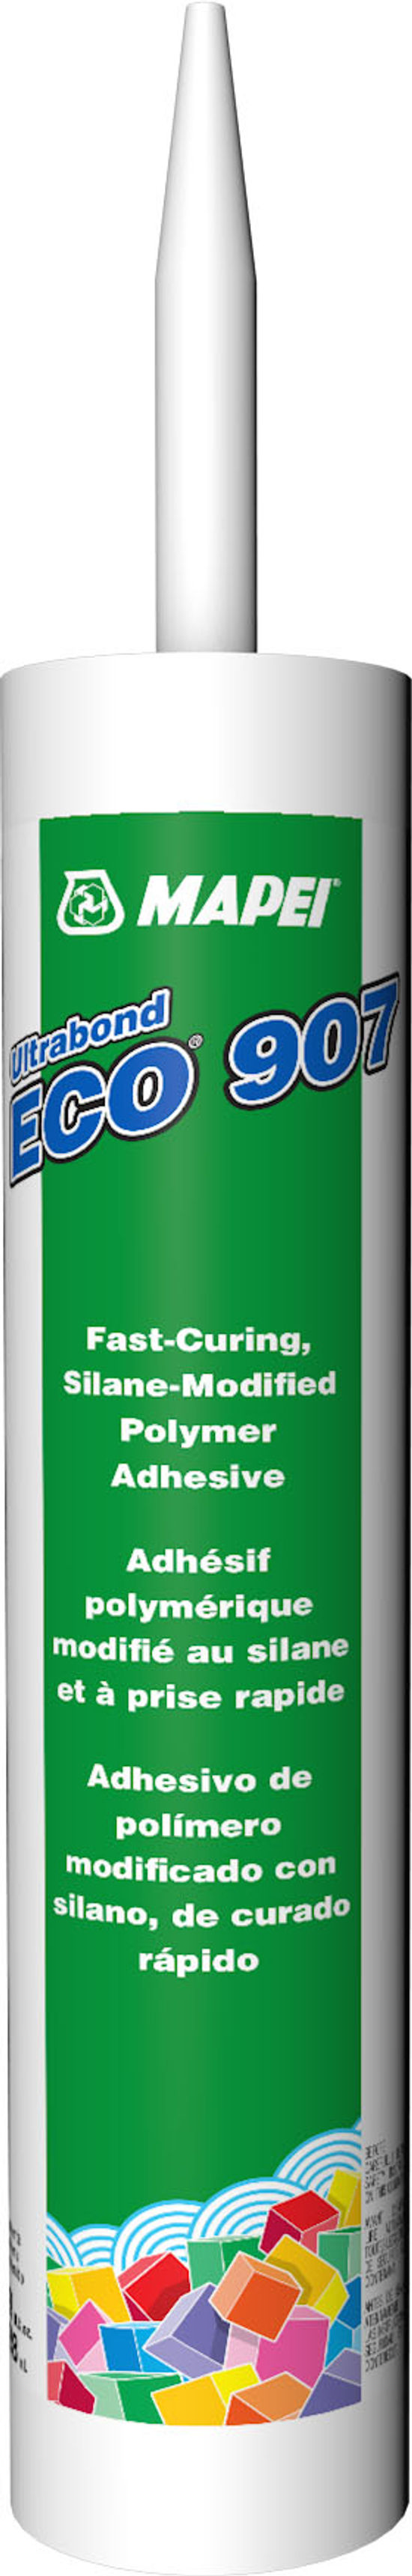 Ultrabond ECO 907 Fast-Curing Silane-Modified Polymer Adhesive 29 oz